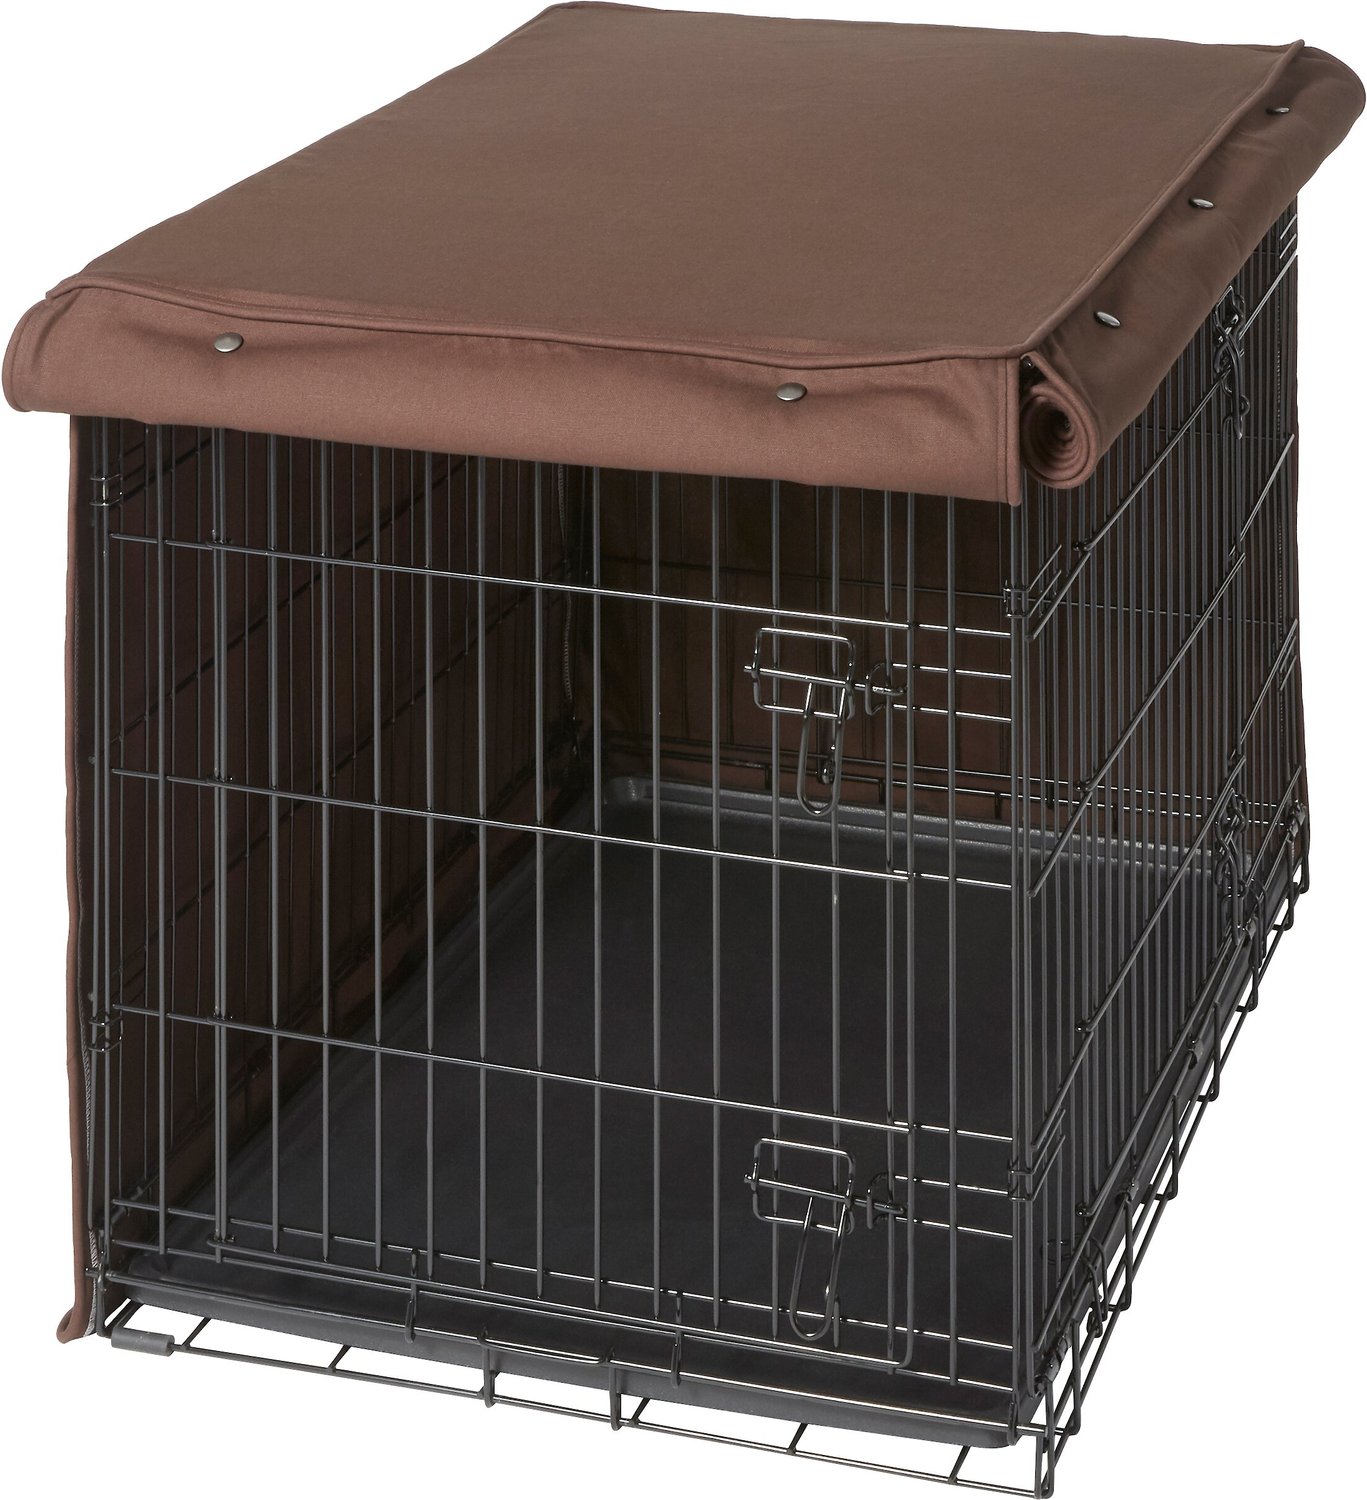 FRISCO Crate Cover, Brown, 36 inch